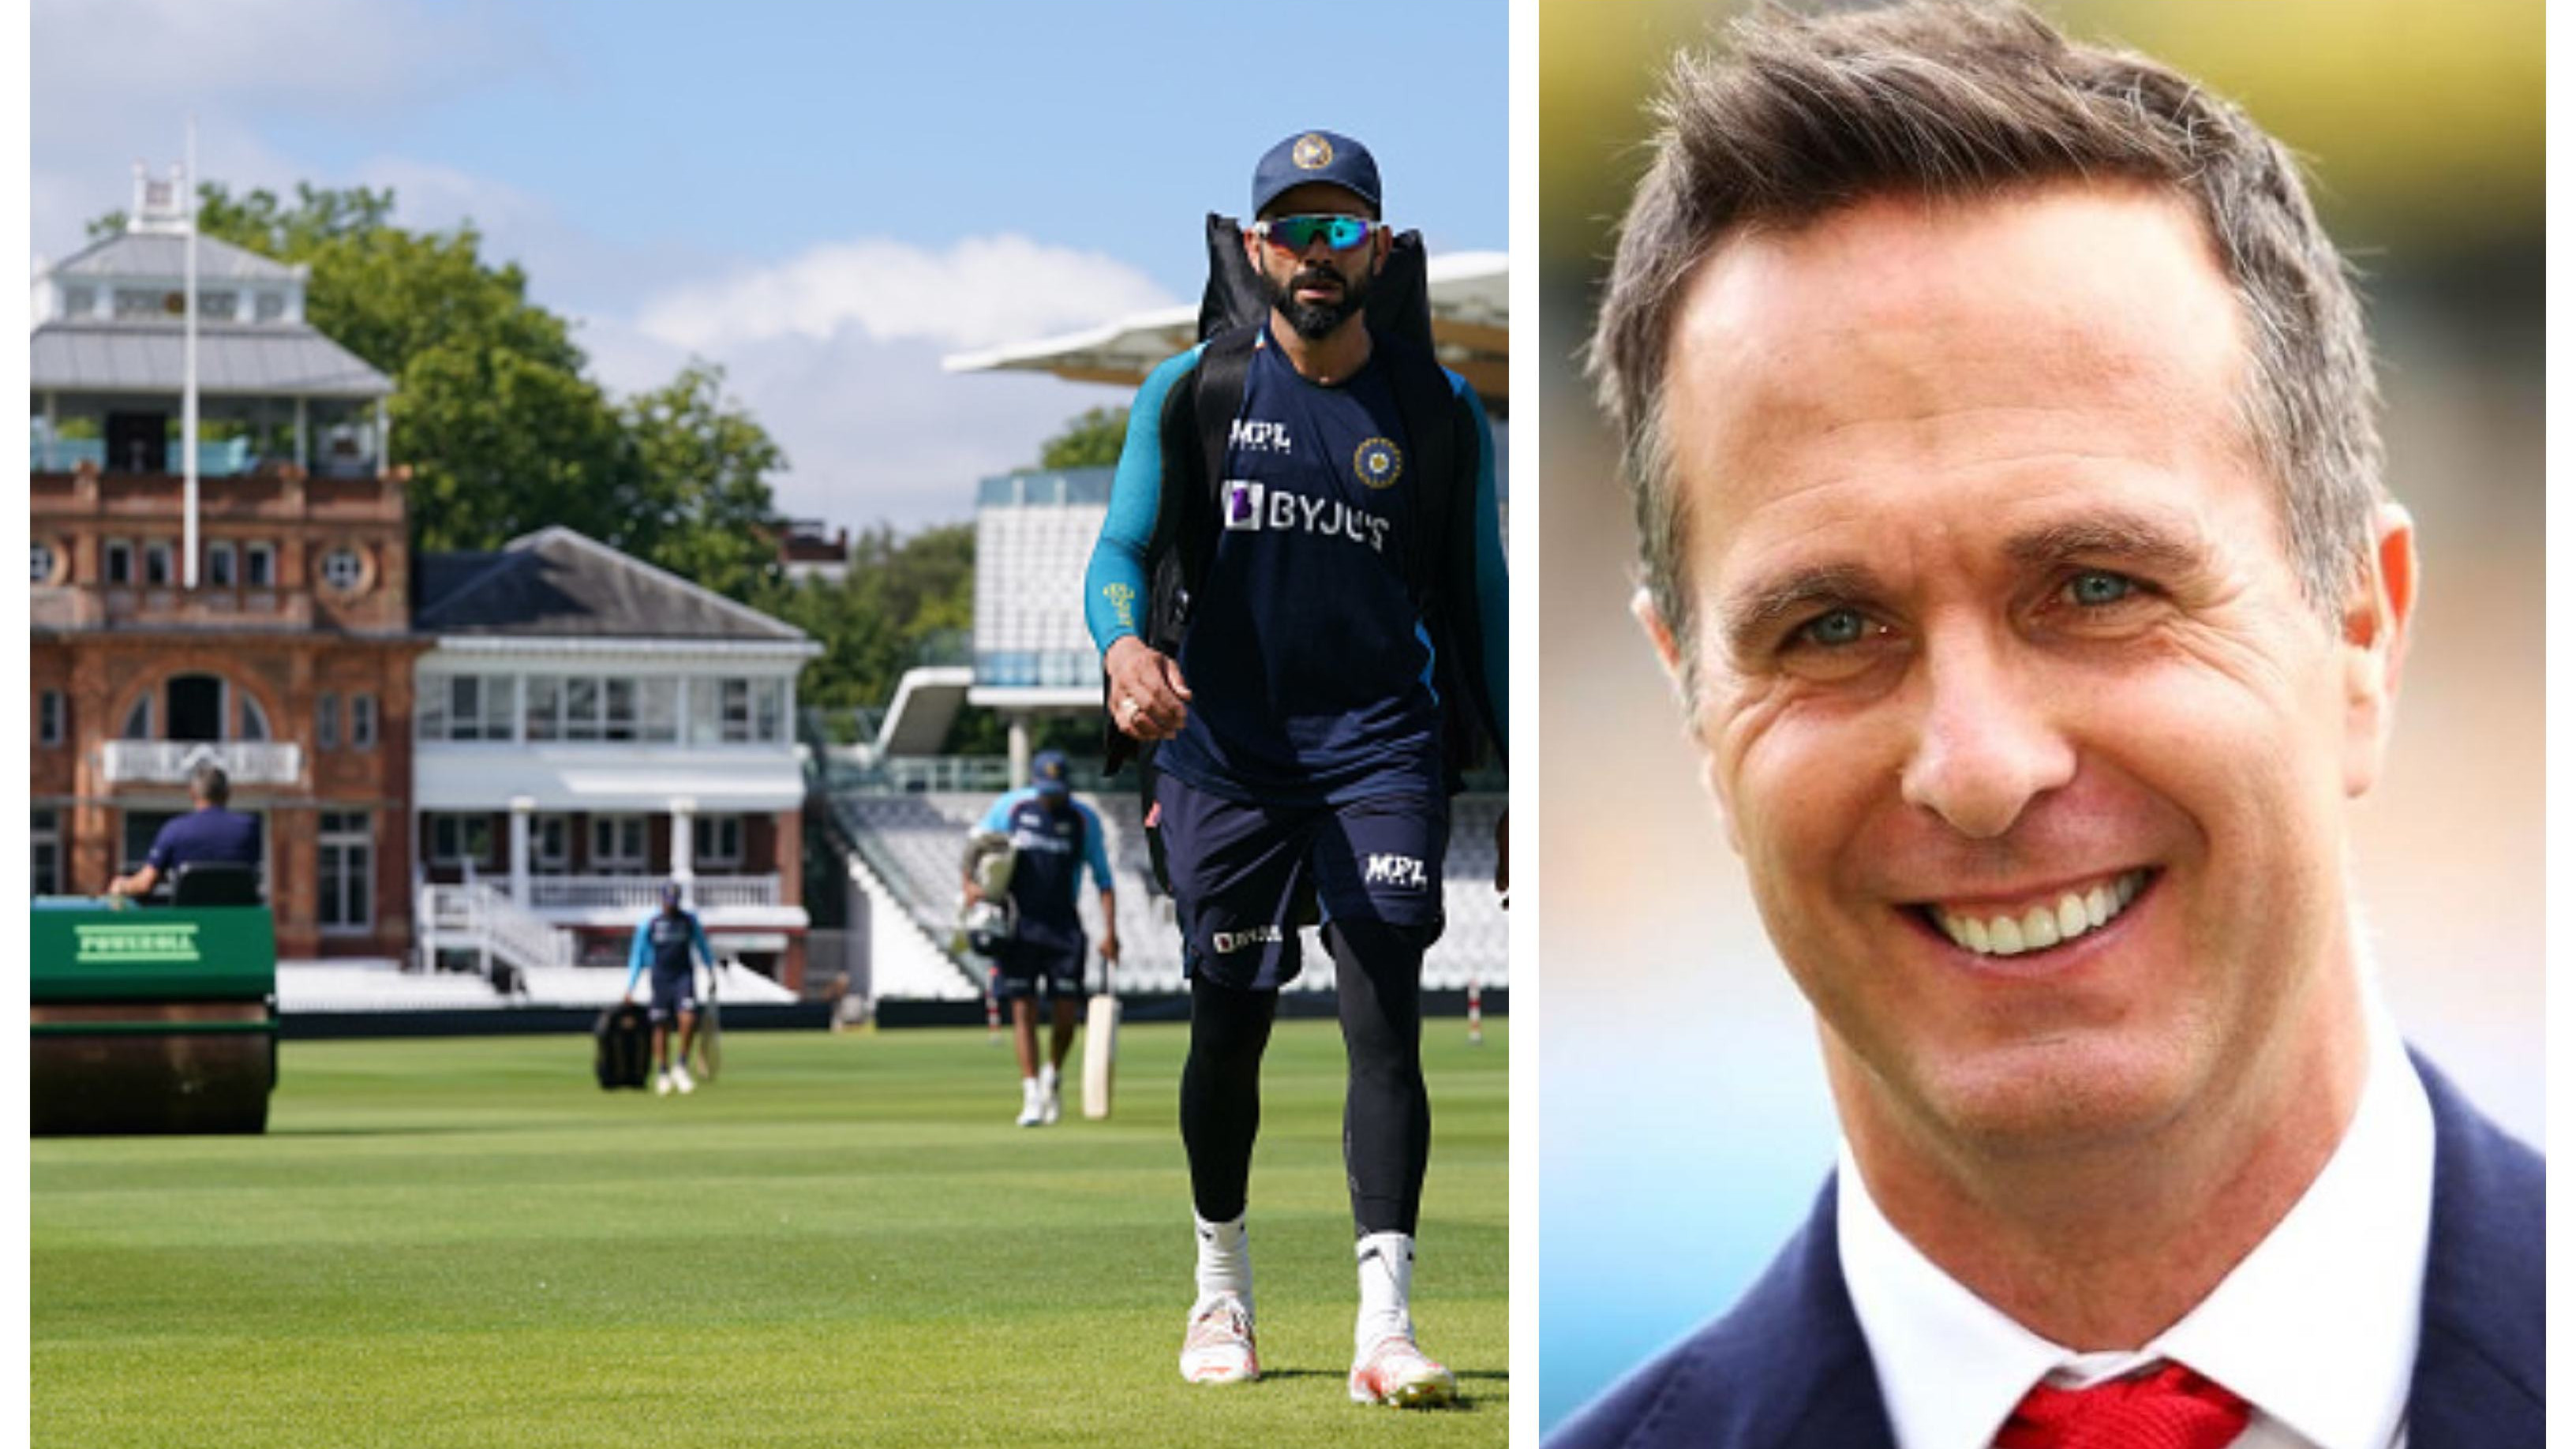 ENG v IND 2021: Michael Vaughan expects full match after a good weather forecast at Lord's